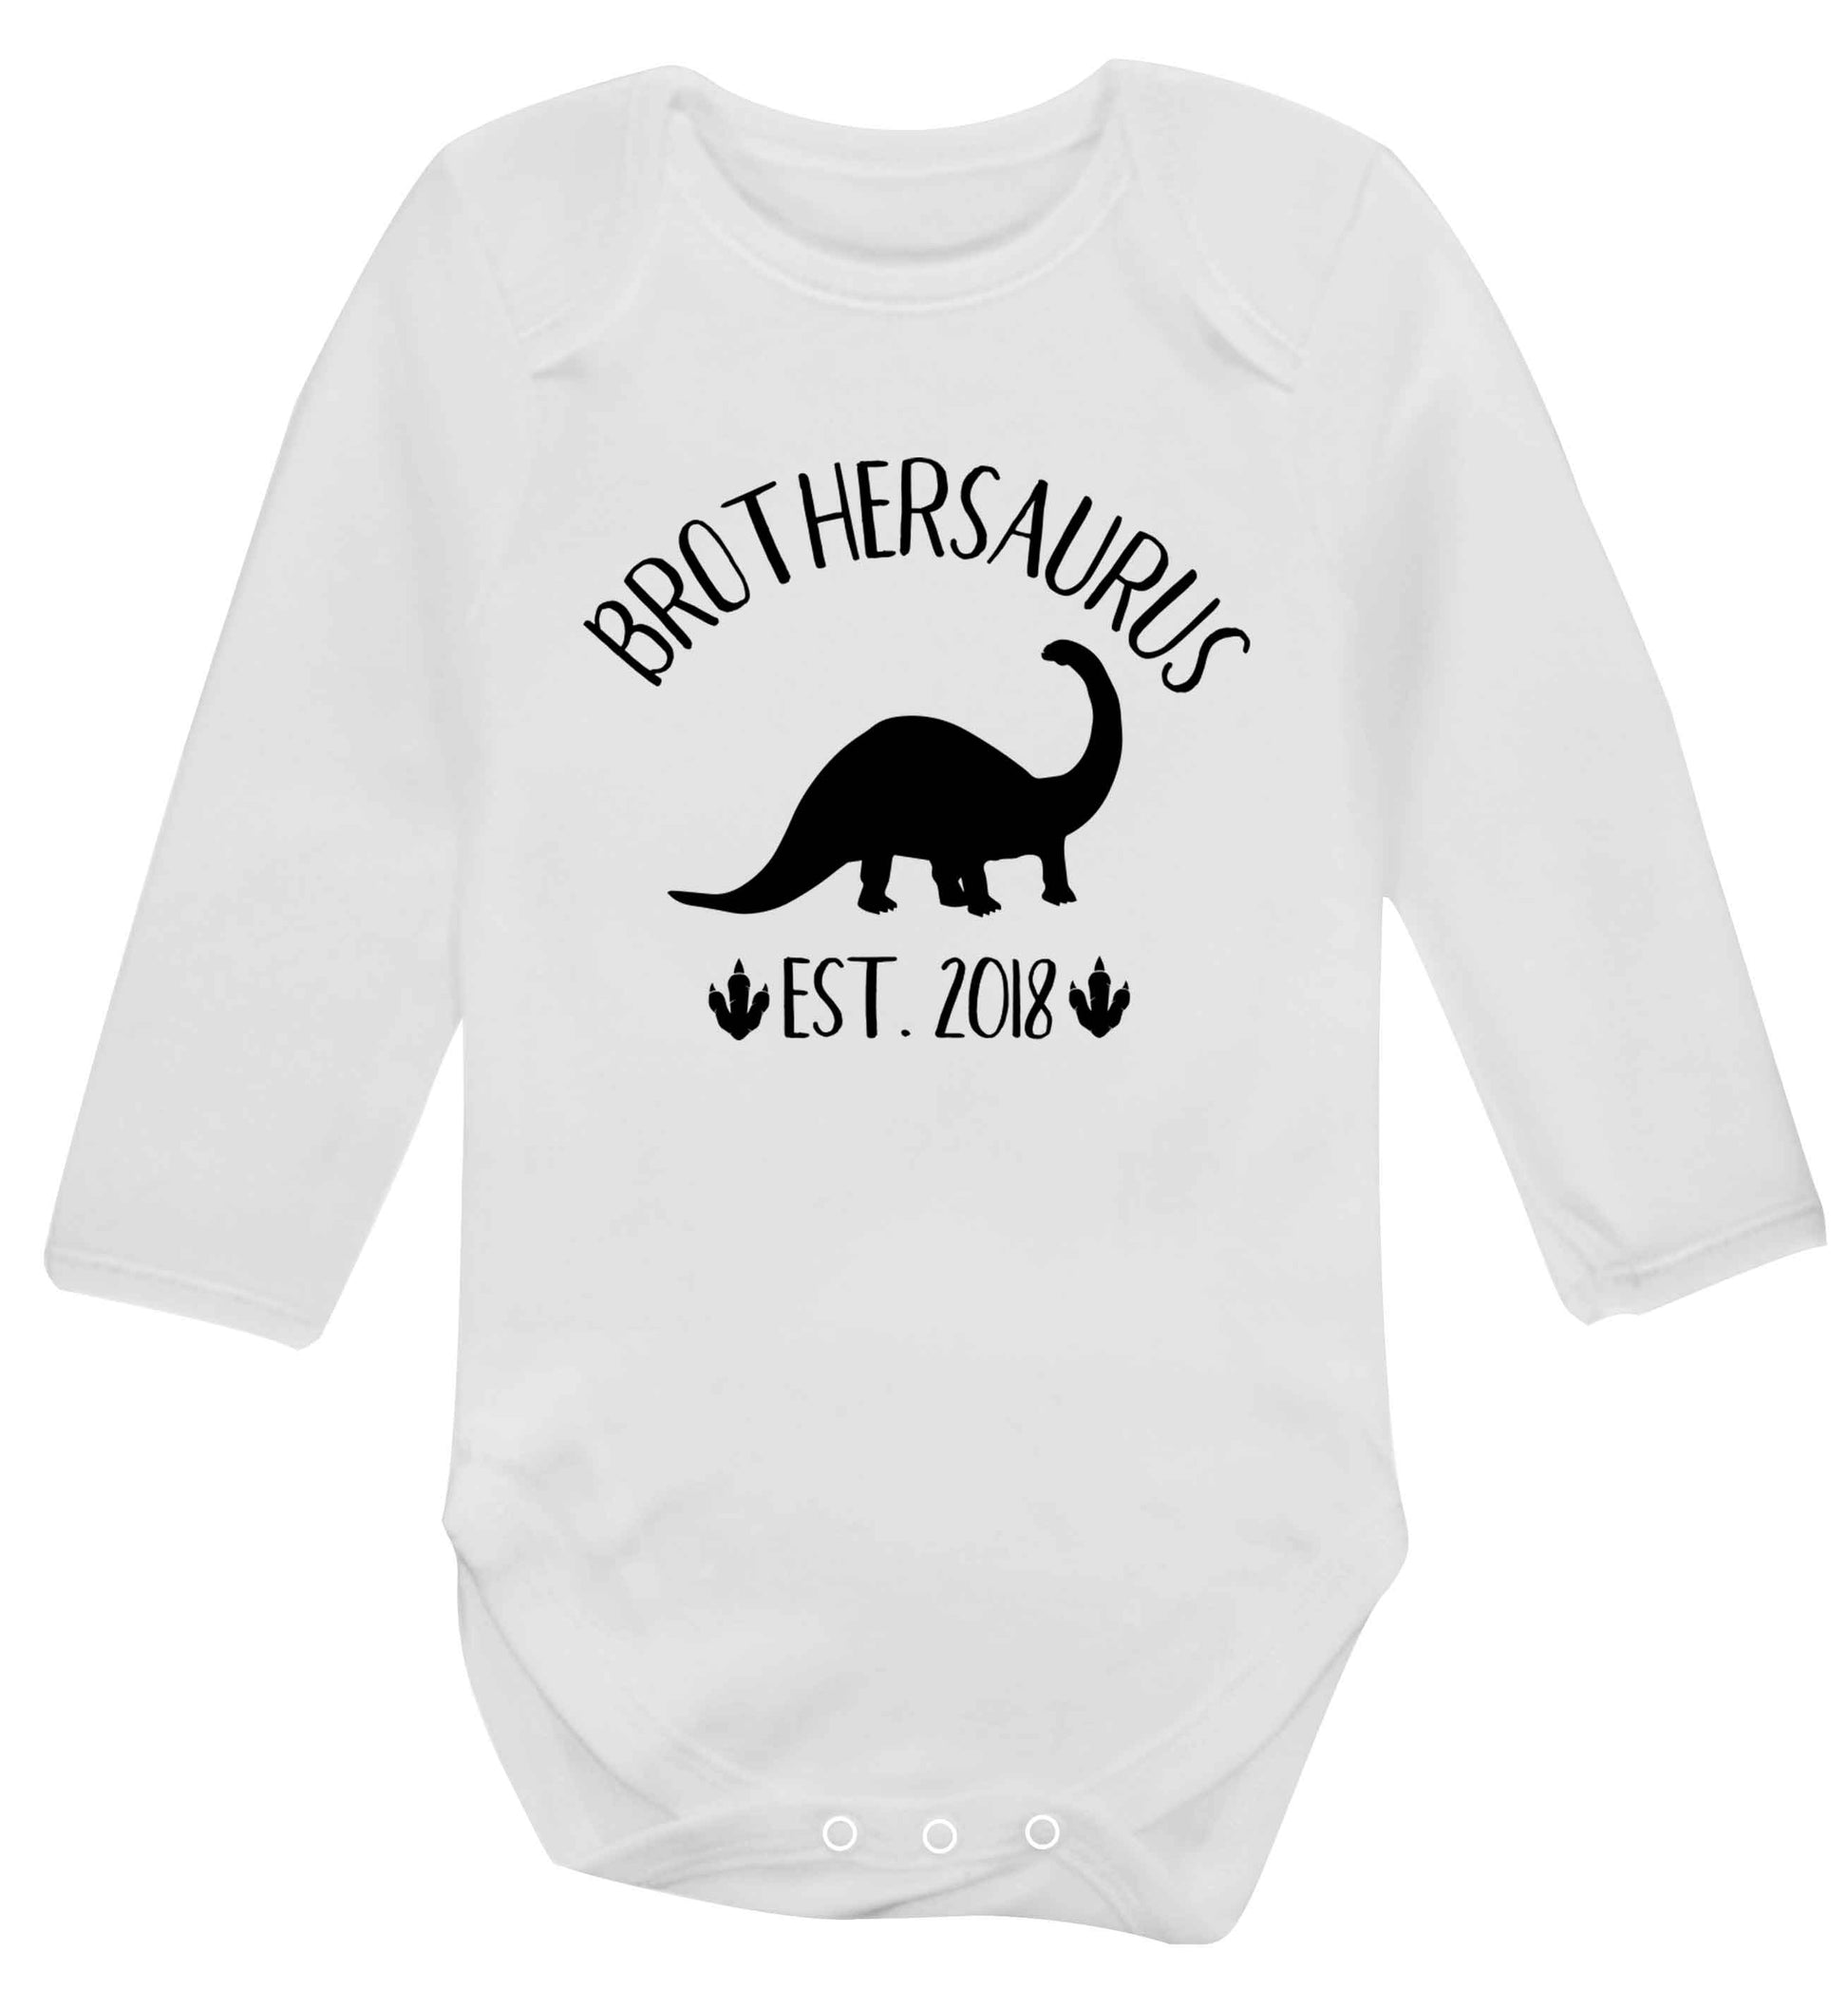 Personalised brothersaurus since (custom date) Baby Vest long sleeved white 6-12 months